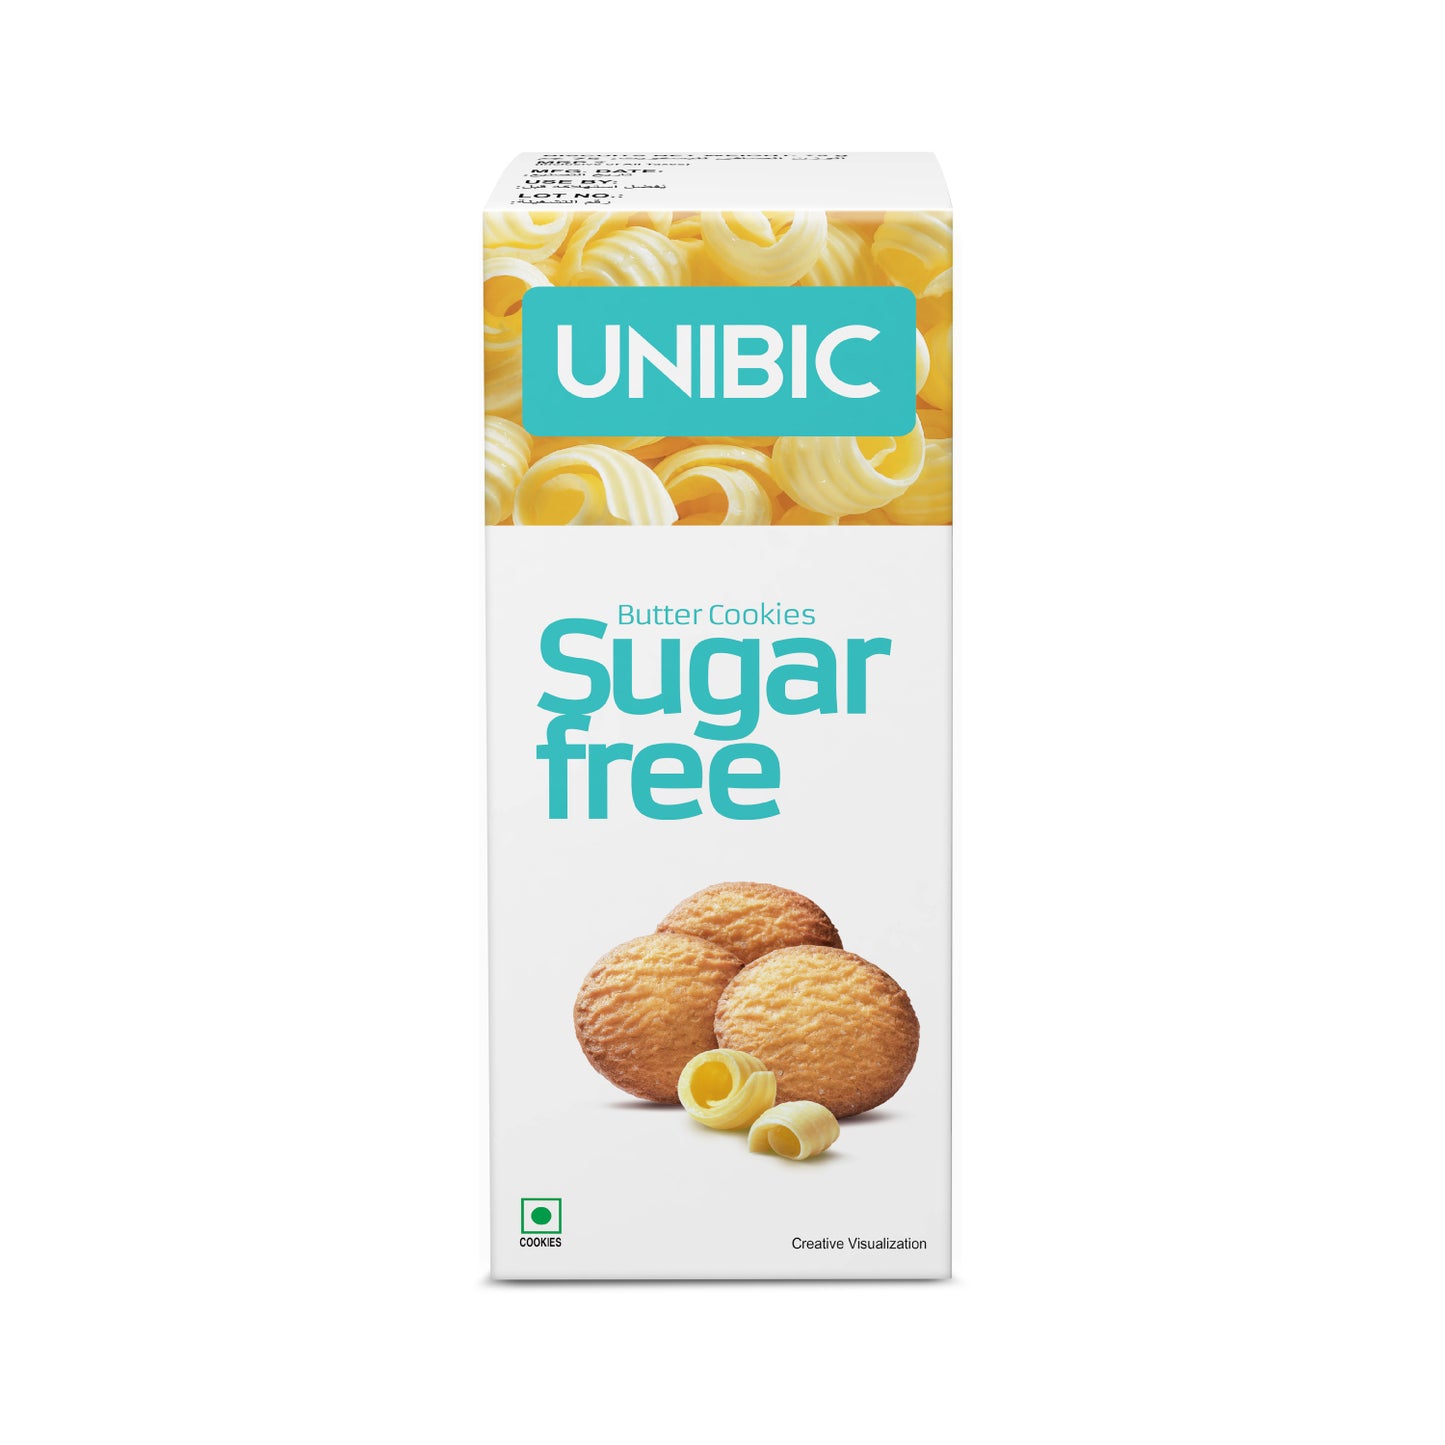 UNIBIC : Sugar Free Butter Cookies, 75g